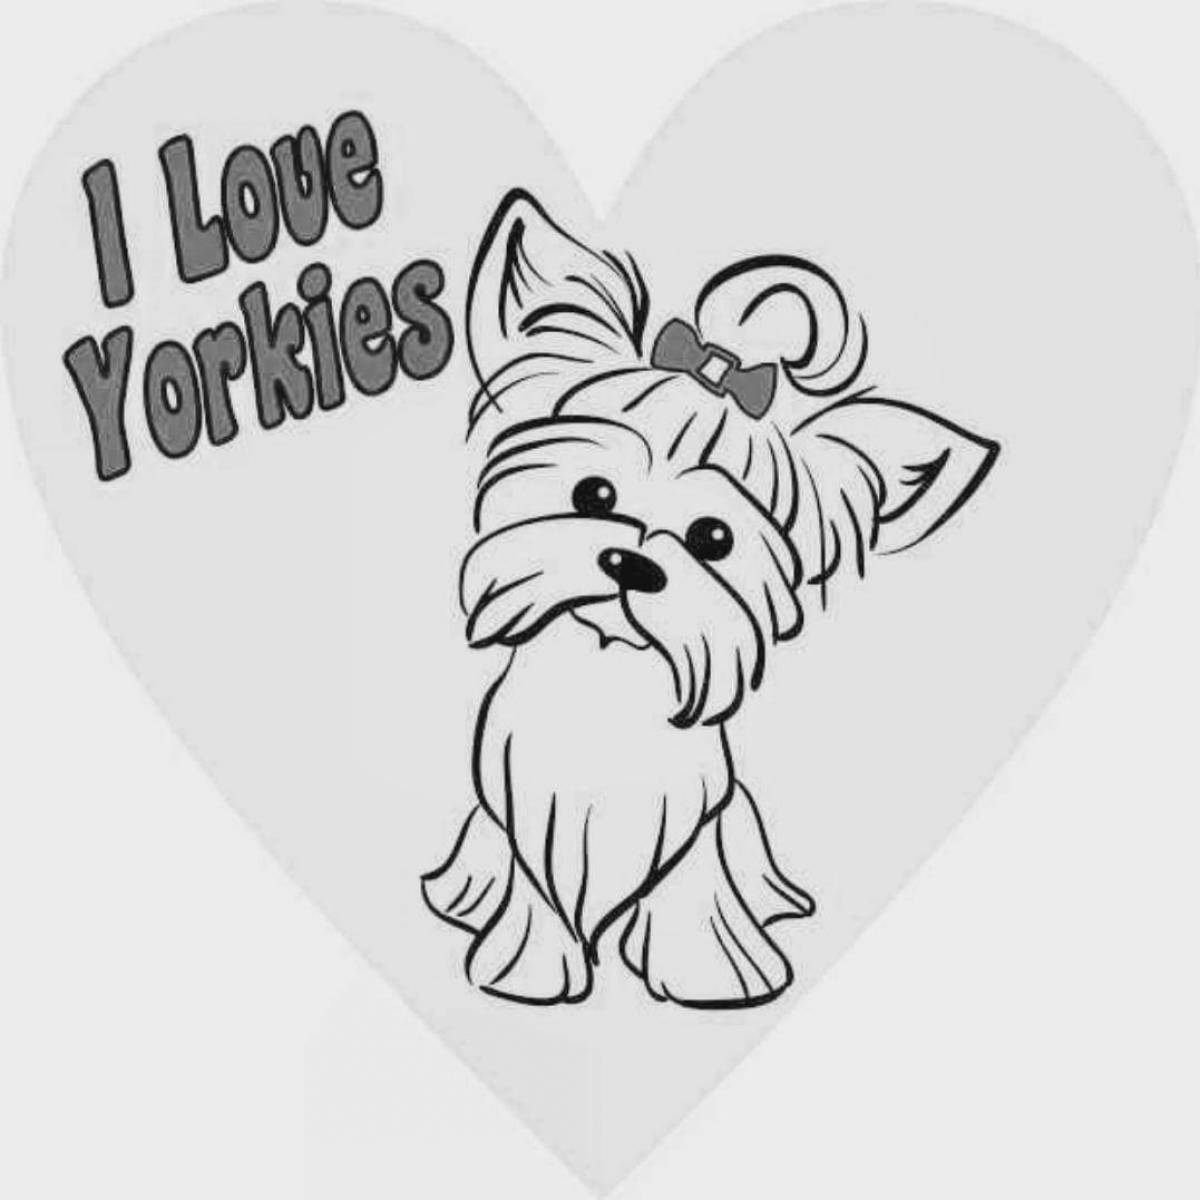 Coloring book inquisitive yorkshire terrier